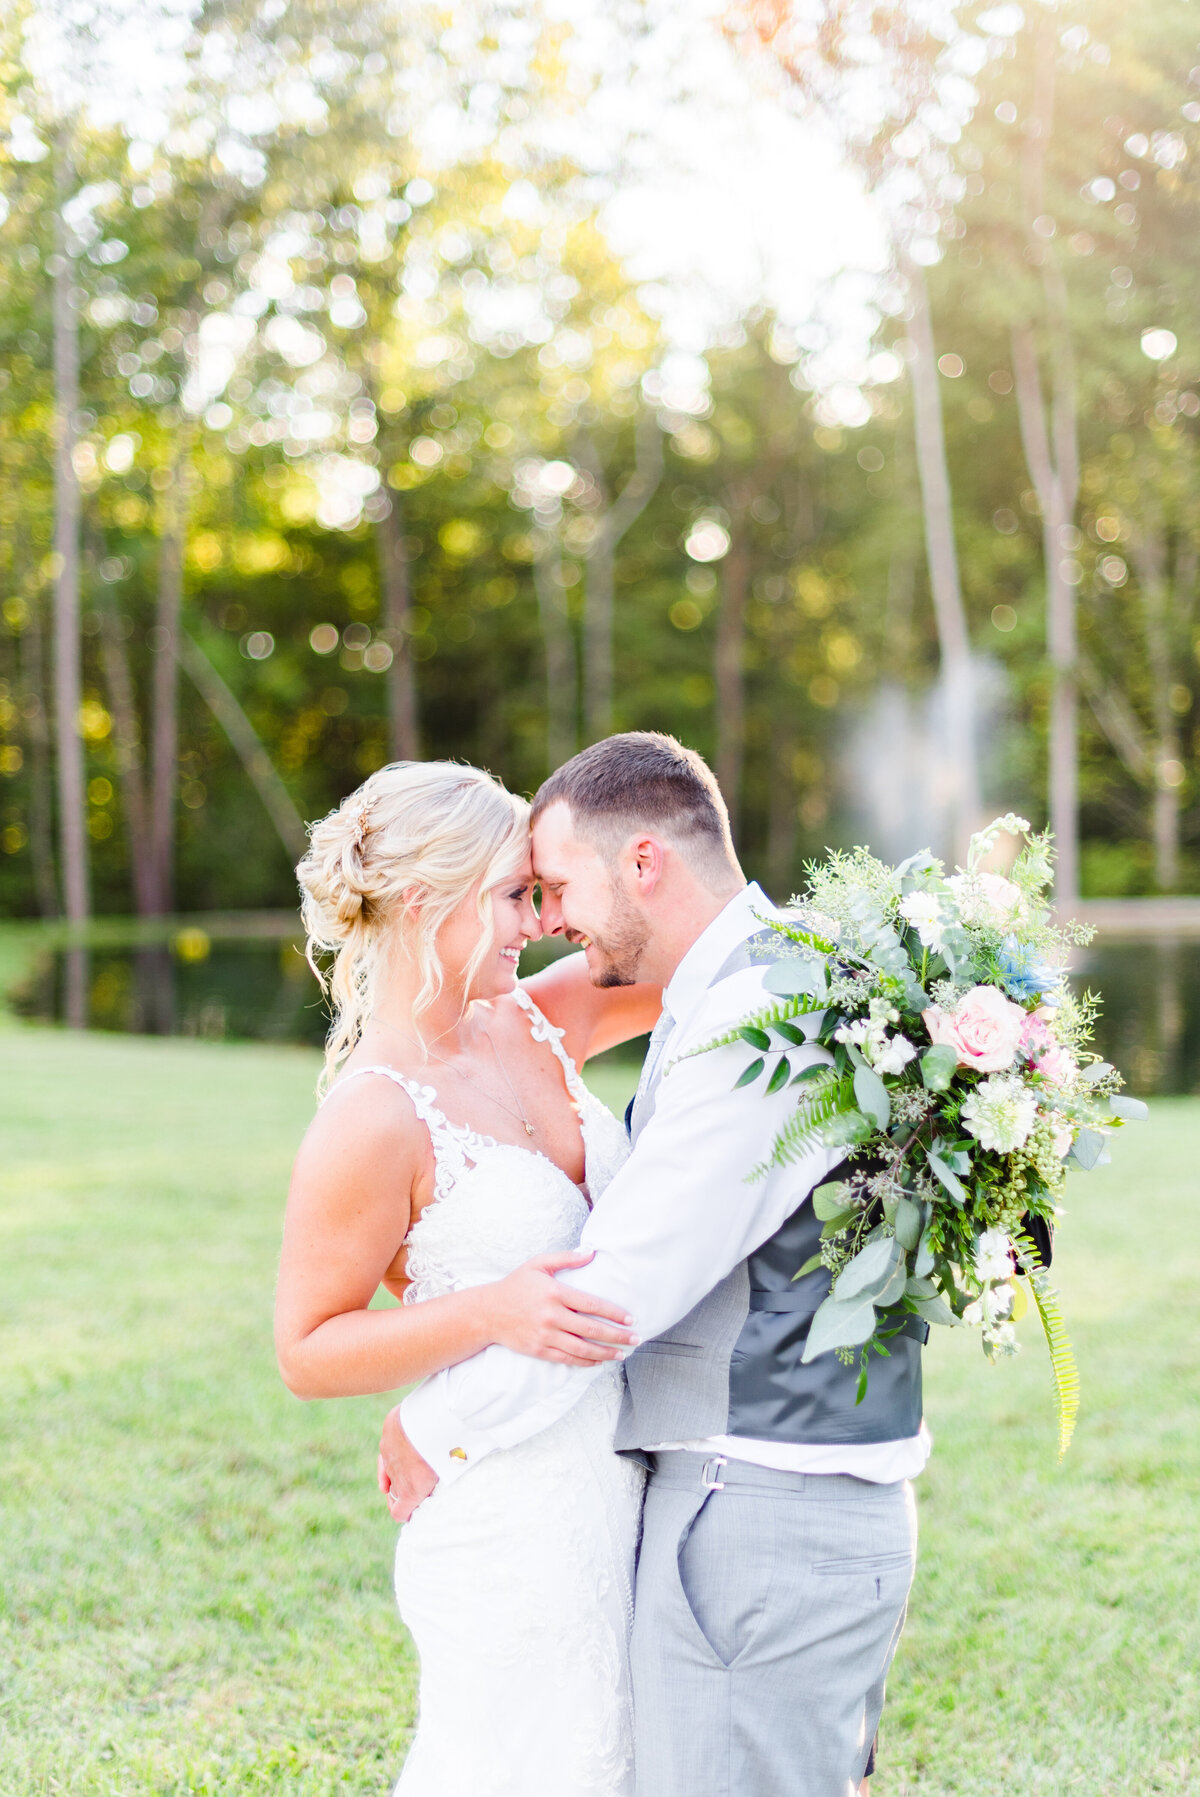 Courtney + Dylan's Wedding Day - Photography by Gerri Anna-658